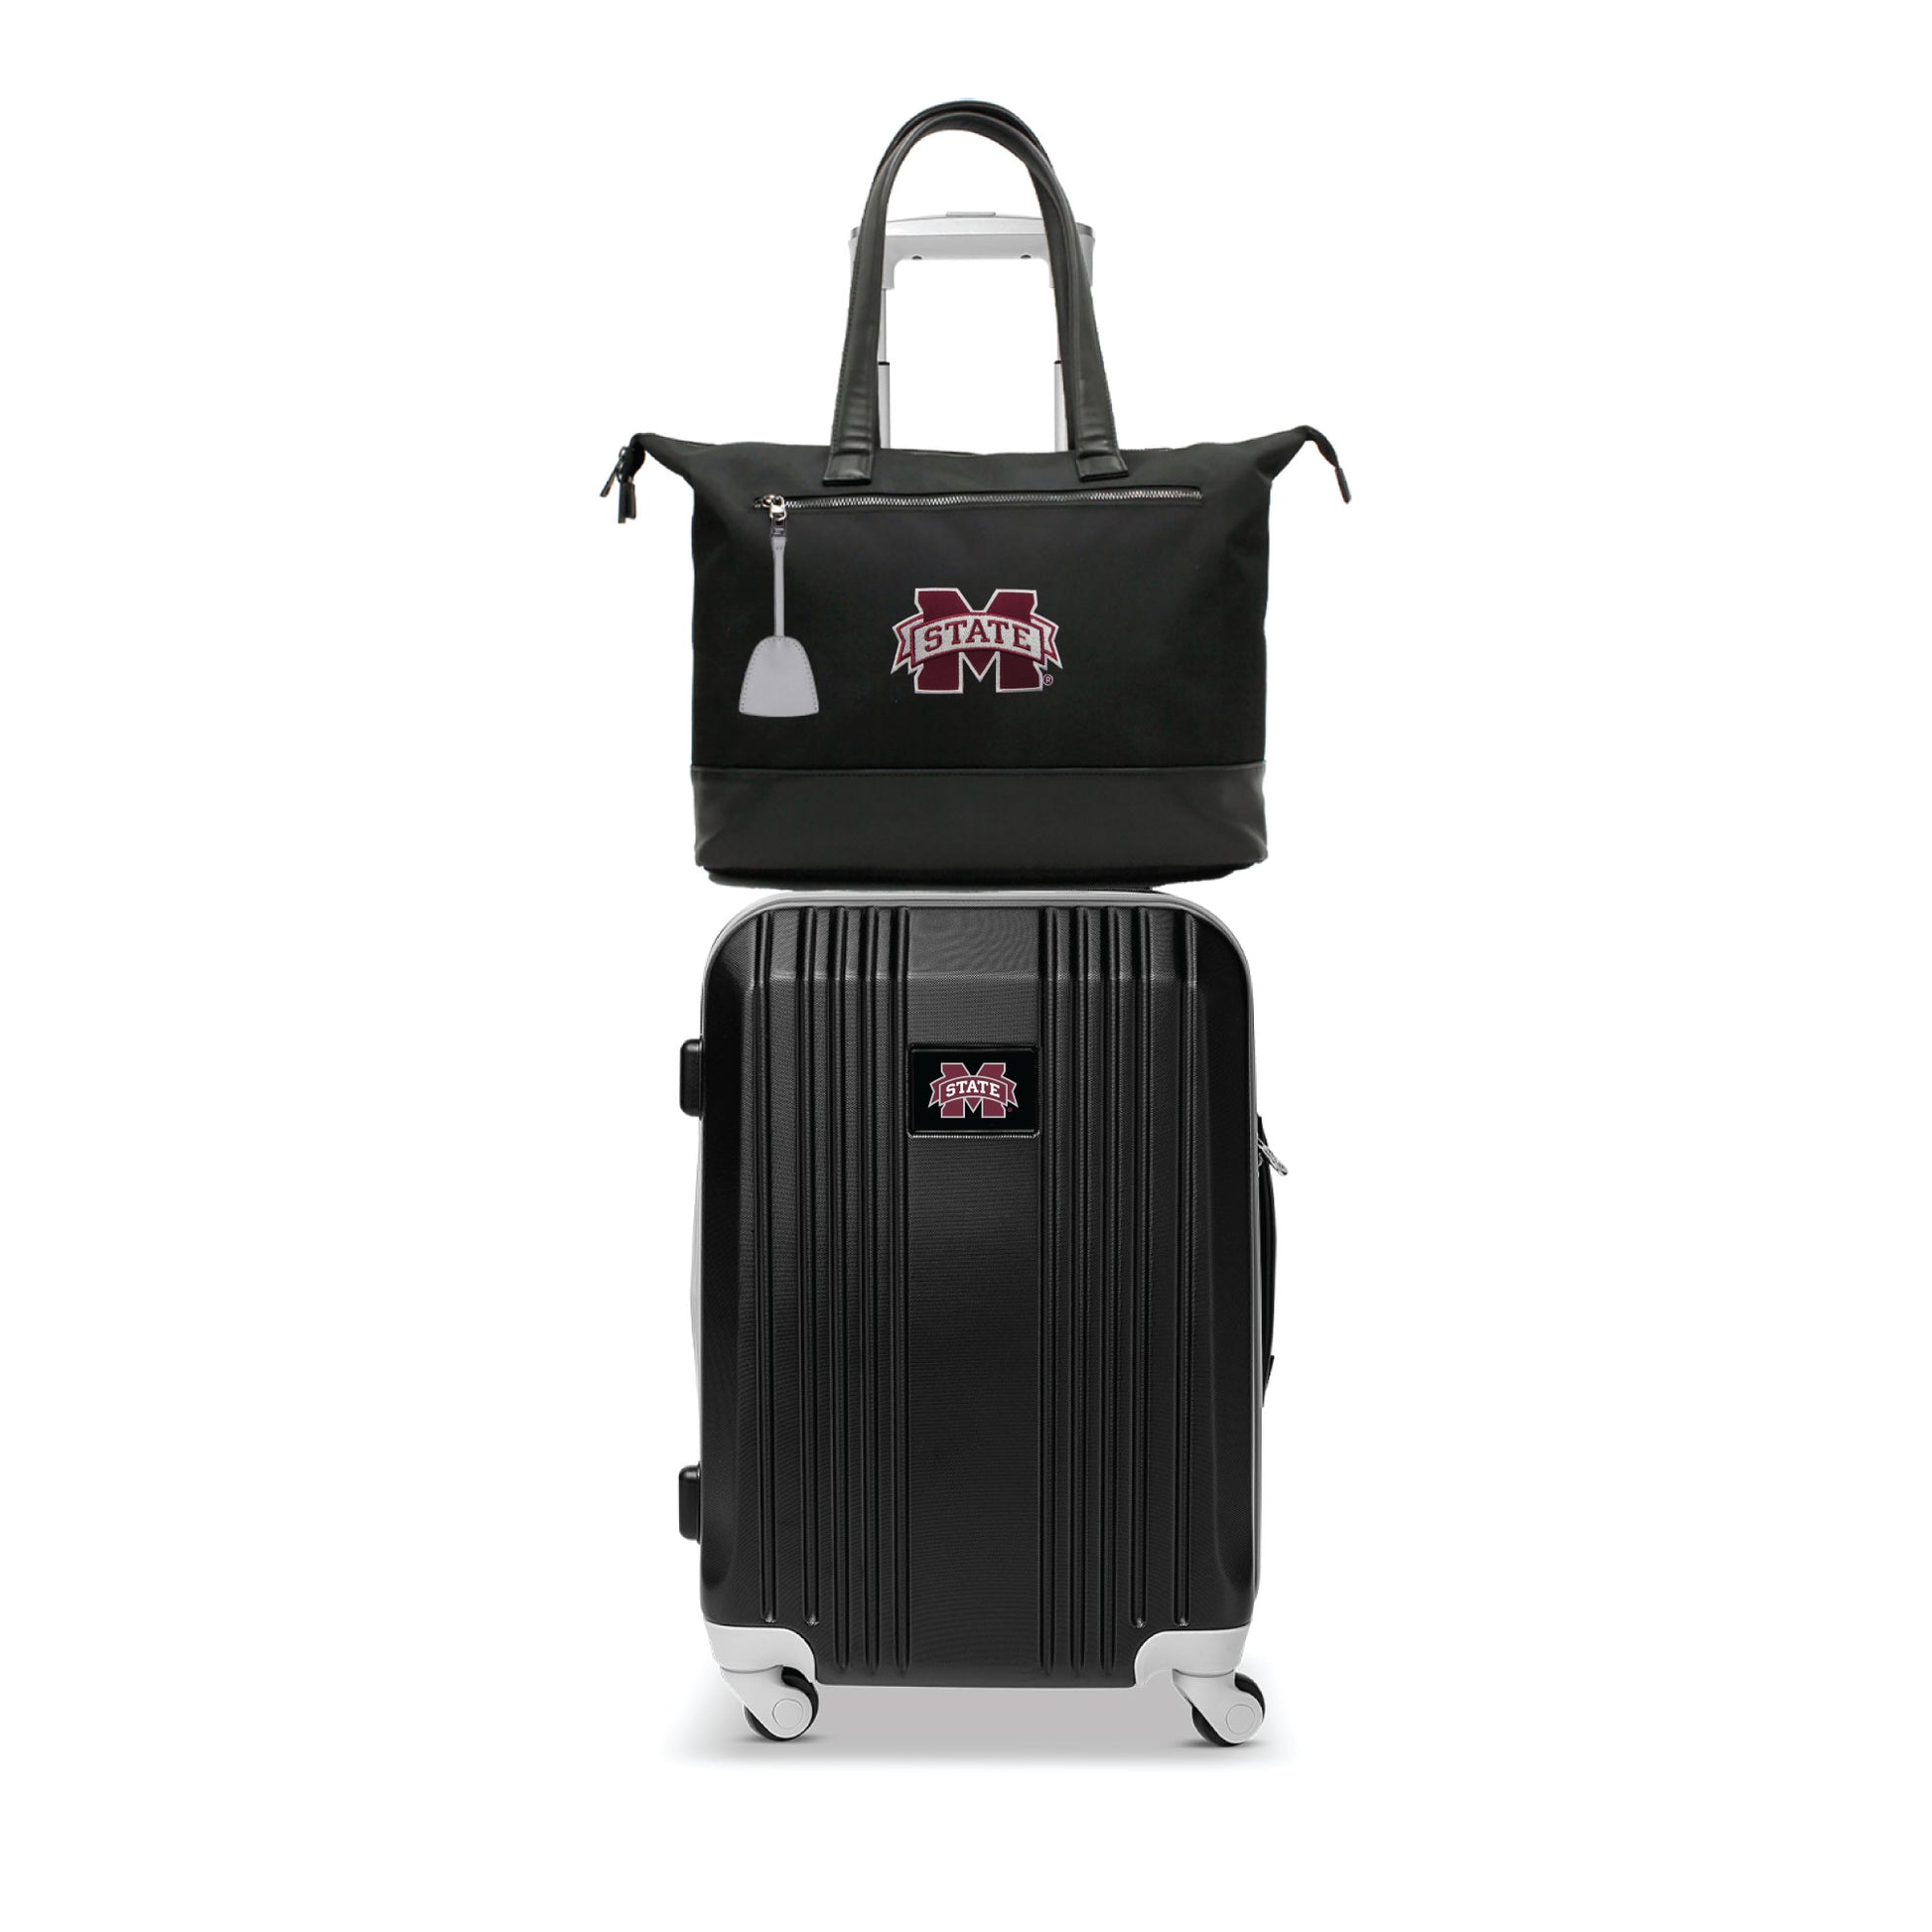 Mississippi State Bulldogs Premium Laptop Tote Bag and Luggage Set